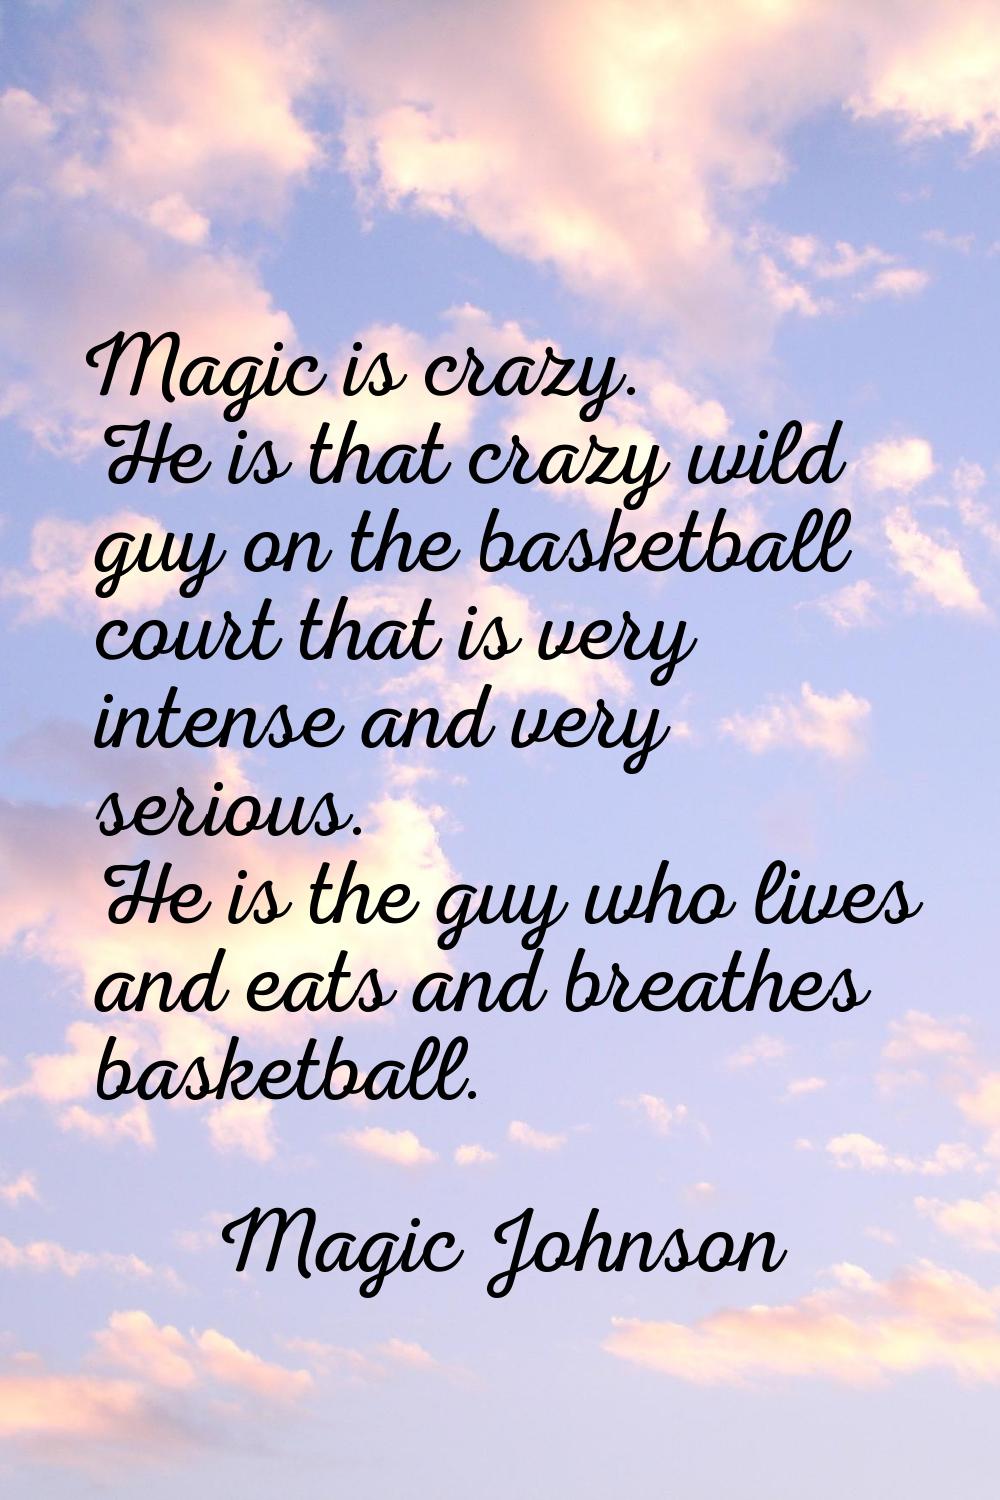 Magic is crazy. He is that crazy wild guy on the basketball court that is very intense and very ser